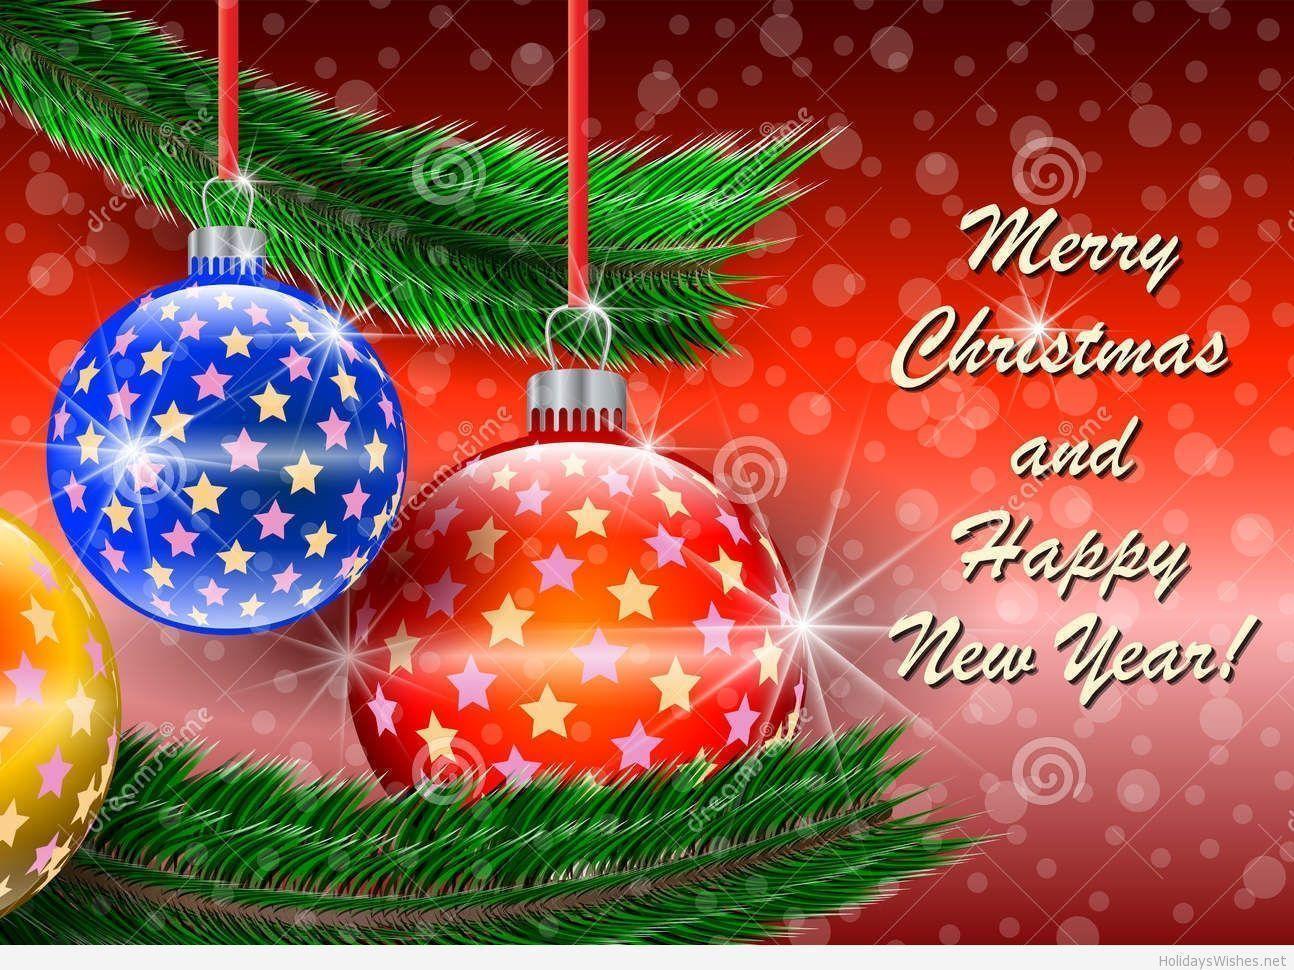 Merry Christmas Happy New Year 2015 HD Wallpaper